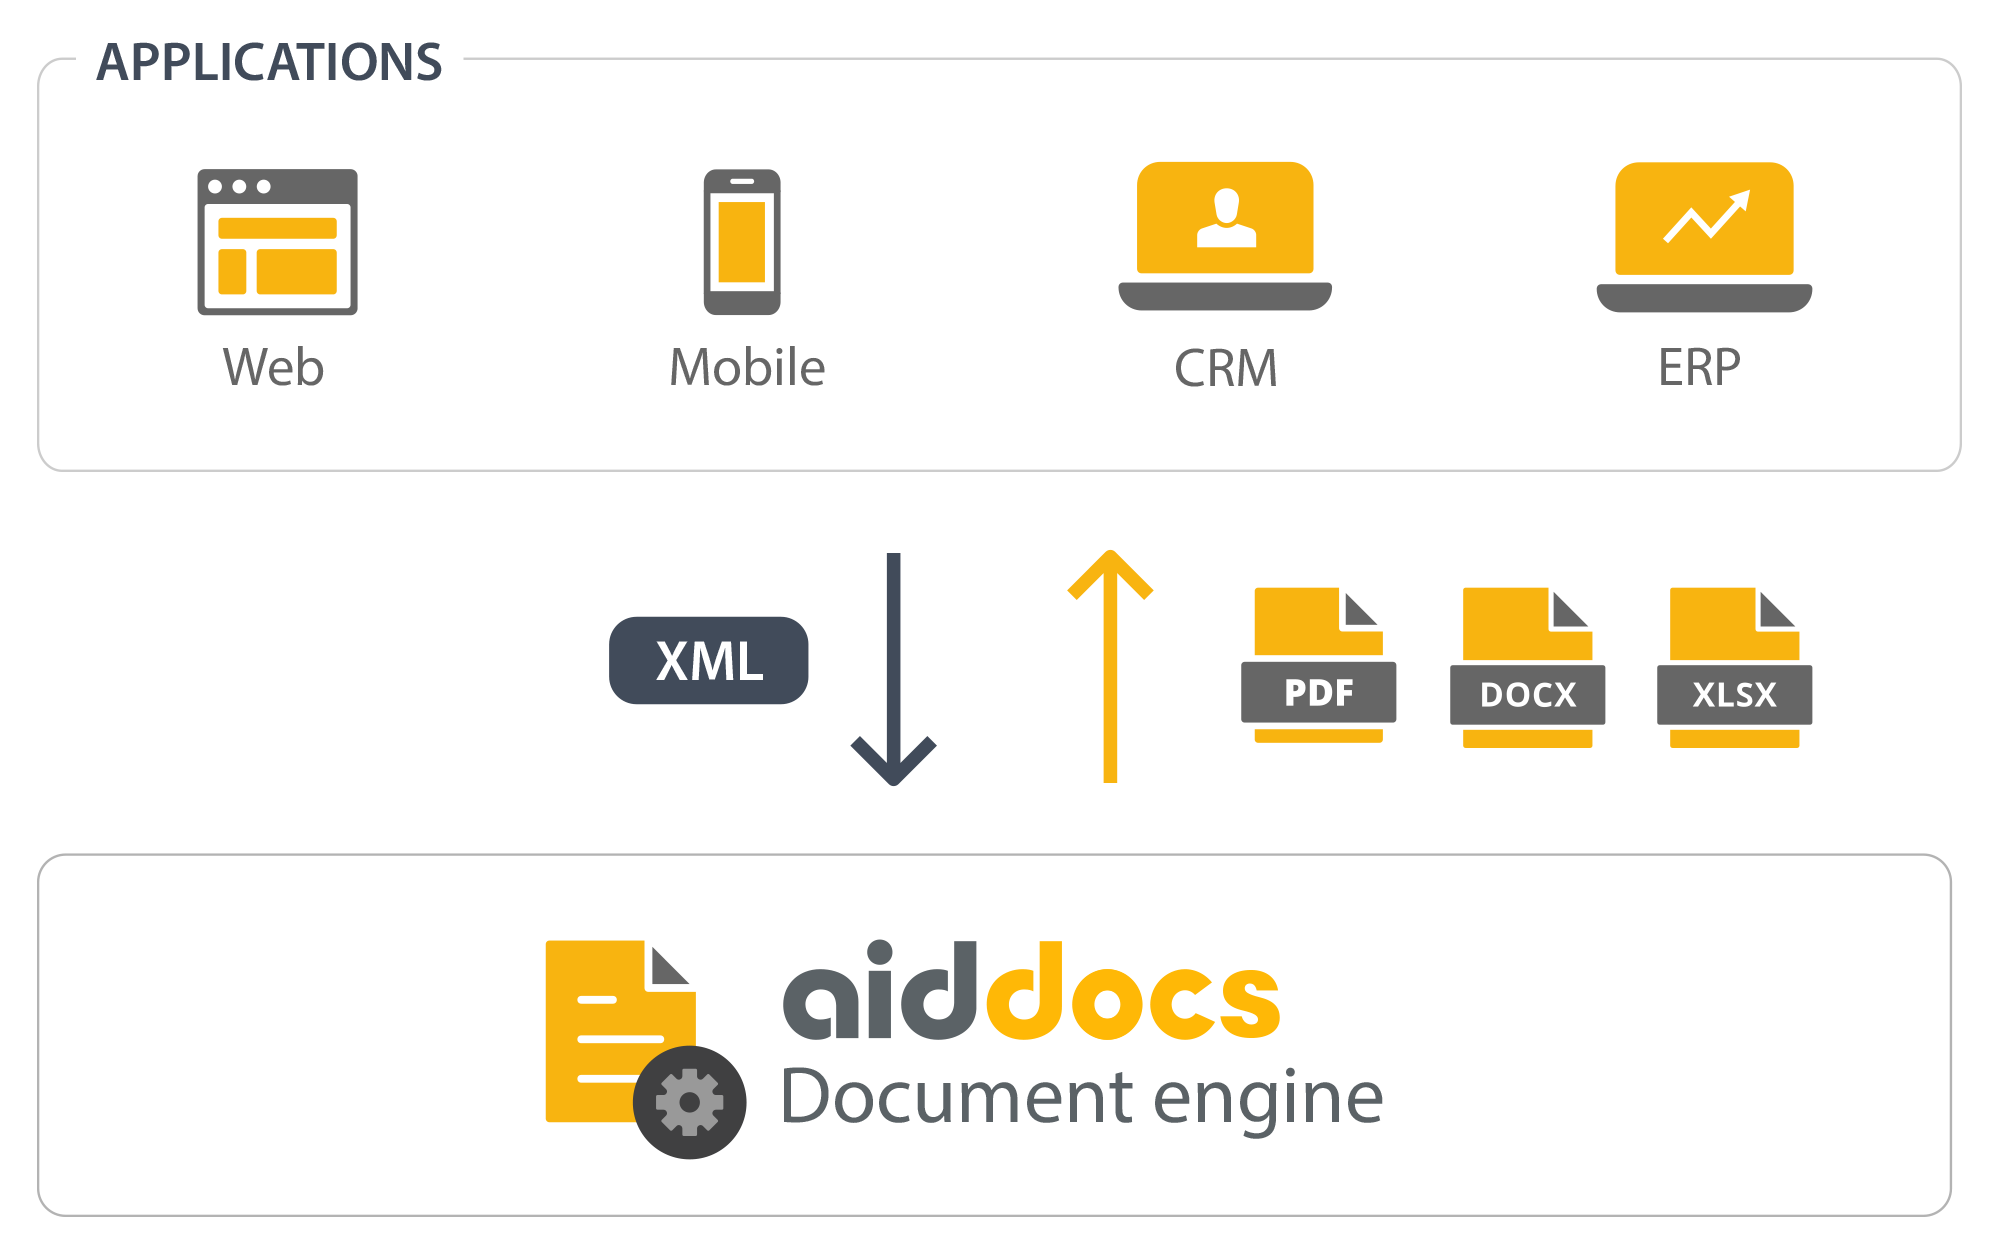 Aiddocs is a document generation service, available in the cloud or on-premise.